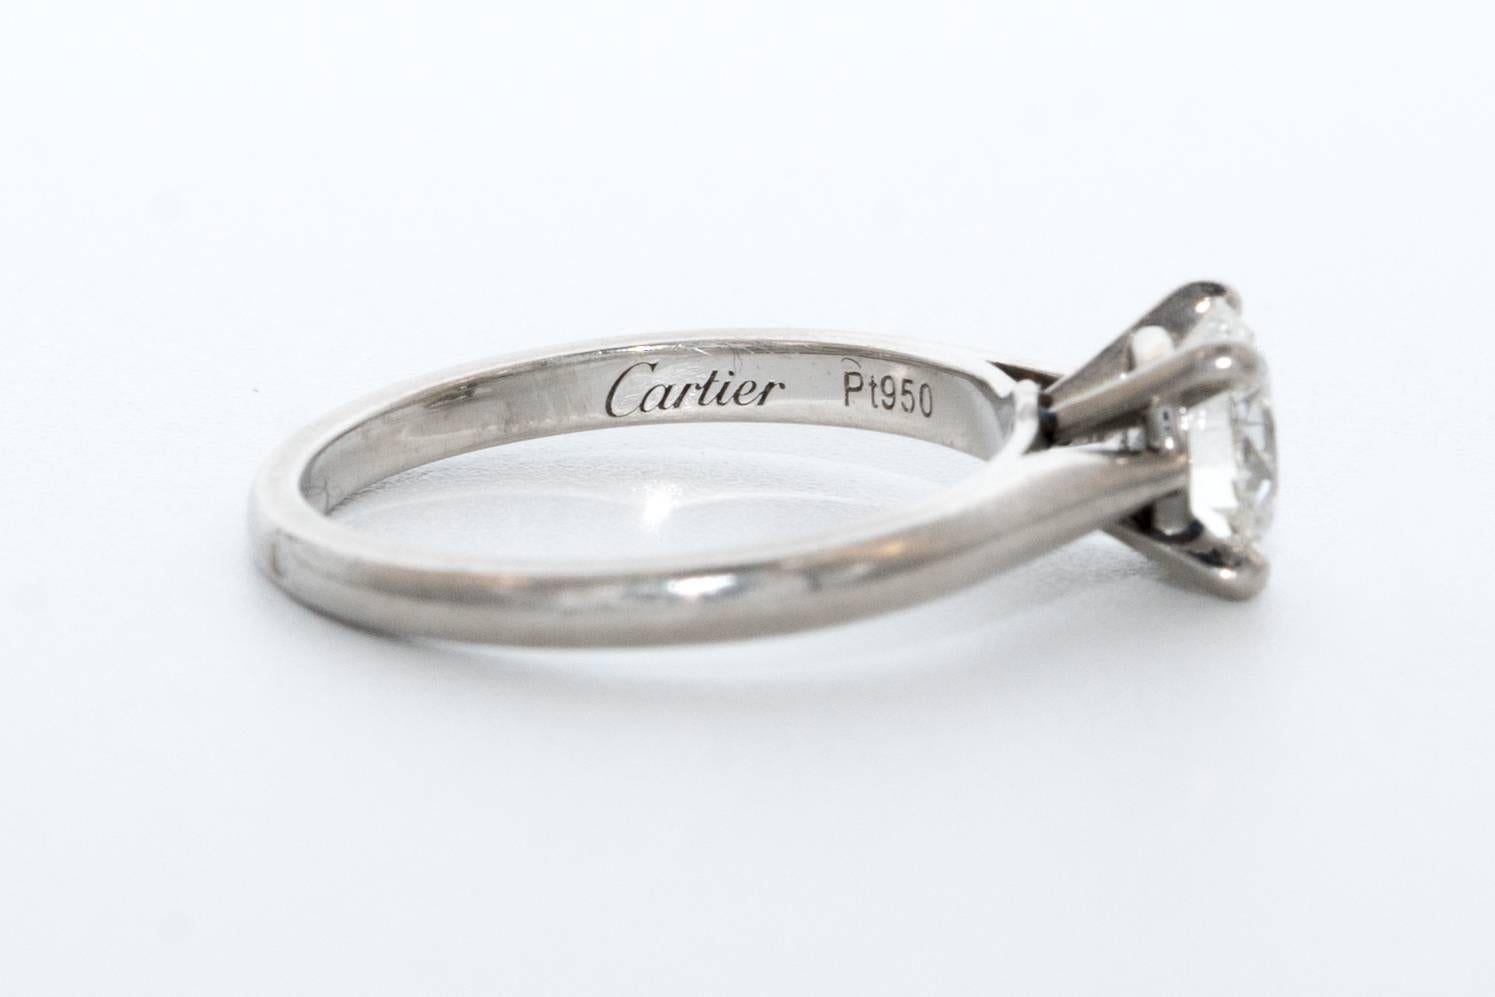 .91 Ct Cartier Engagement Ring , with Original papers and Box
H Color and VVS2 with GIA Certificate # 1142467339
Set in Platinum 
Retail price Euro 11,400, or Approximately USD $13,000 
Size 5.25 , Ring is Re-sizable
